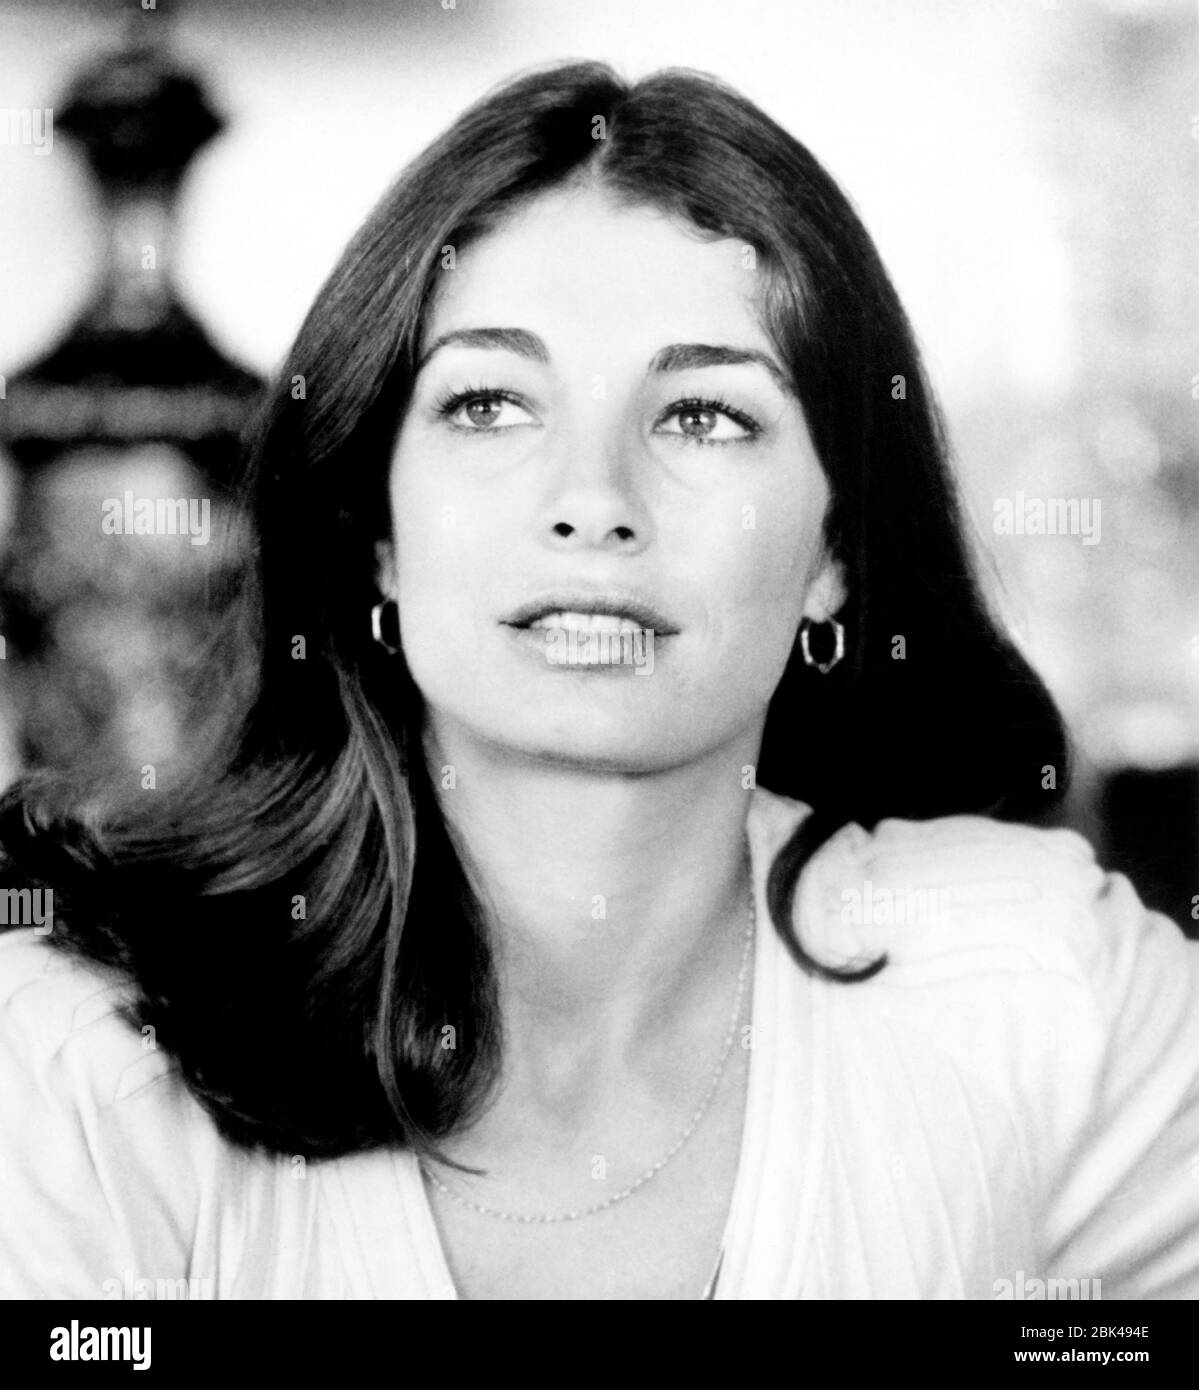 Anne Archer, Head and Shoulders Publicity Portrait for the Film, 'Trackdown', United Artists, 1976 Stockfoto